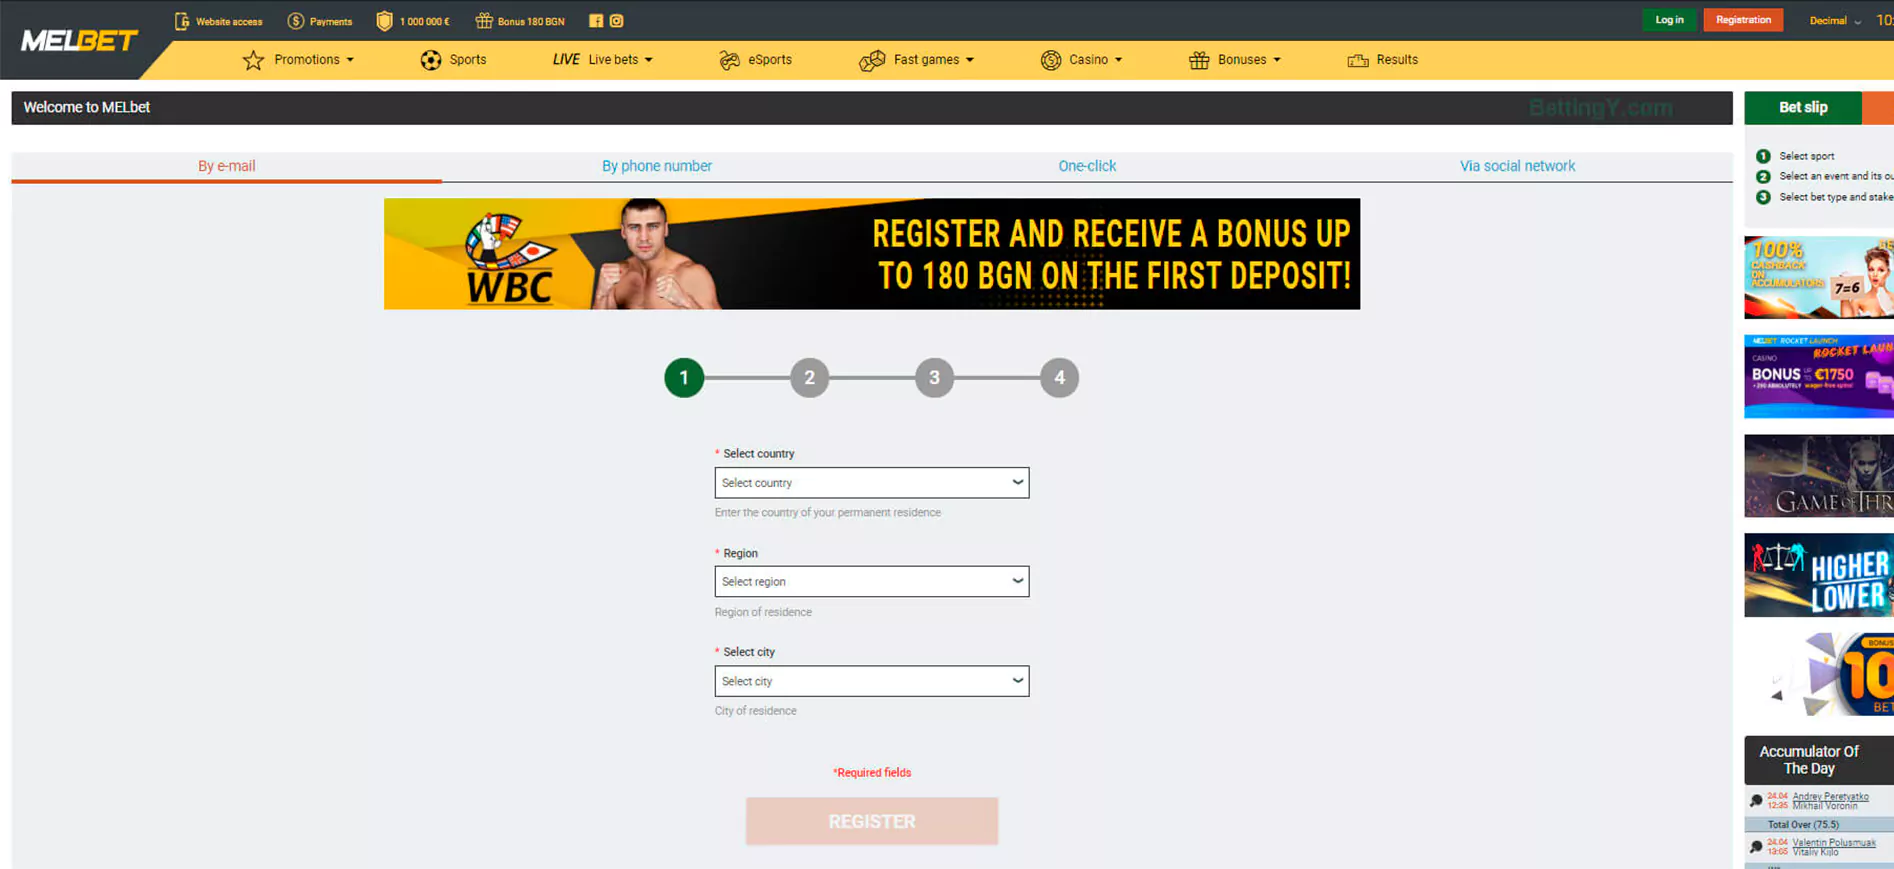 Registration menu for online casino games and sports betting from Melbet online casino